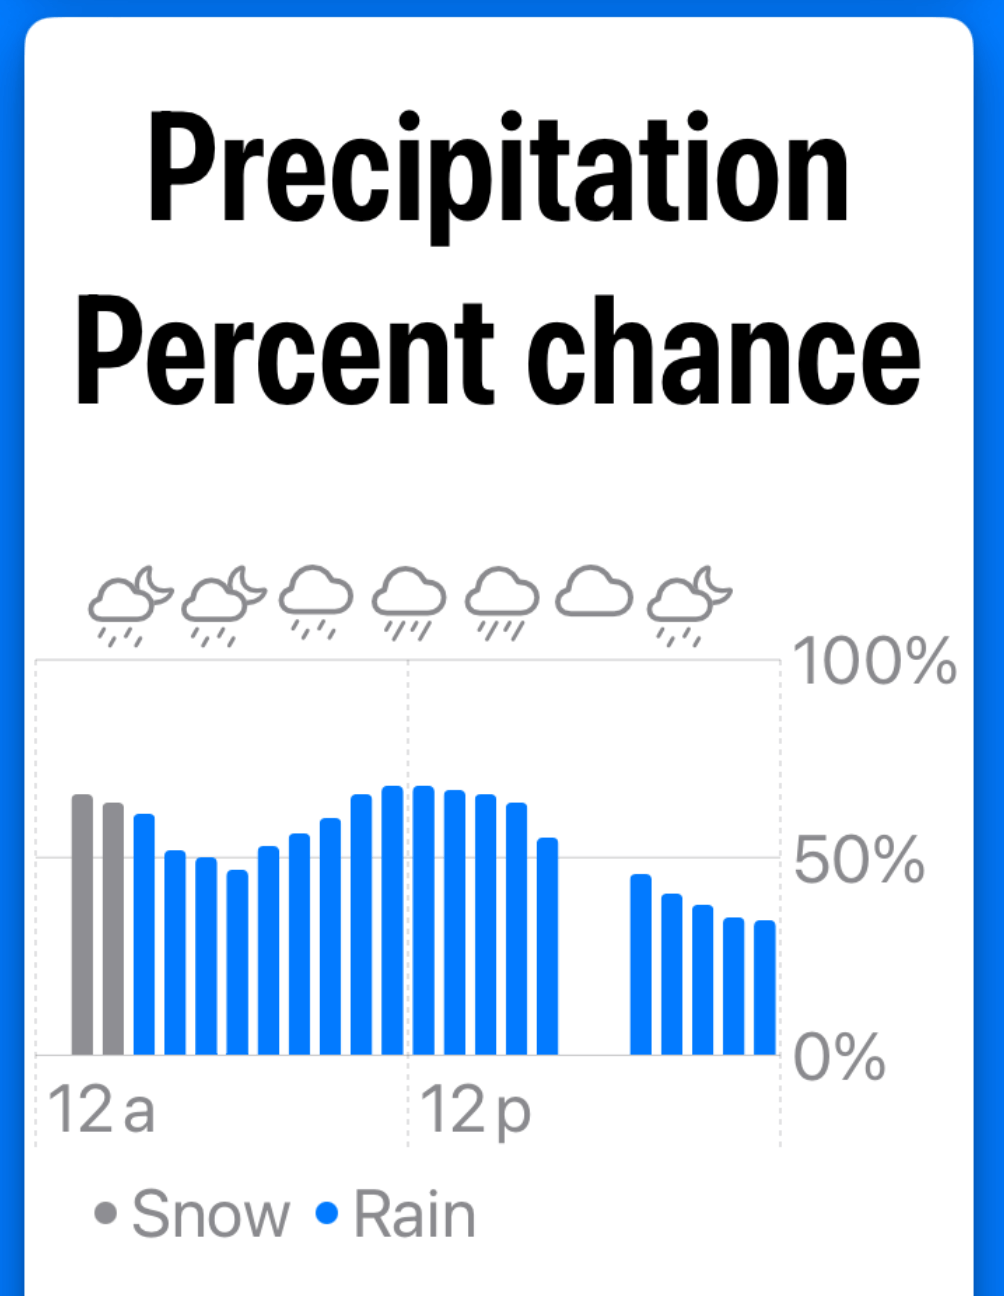 The precipitation chart showing rain and snow. The title is much larger than the text for the axis.